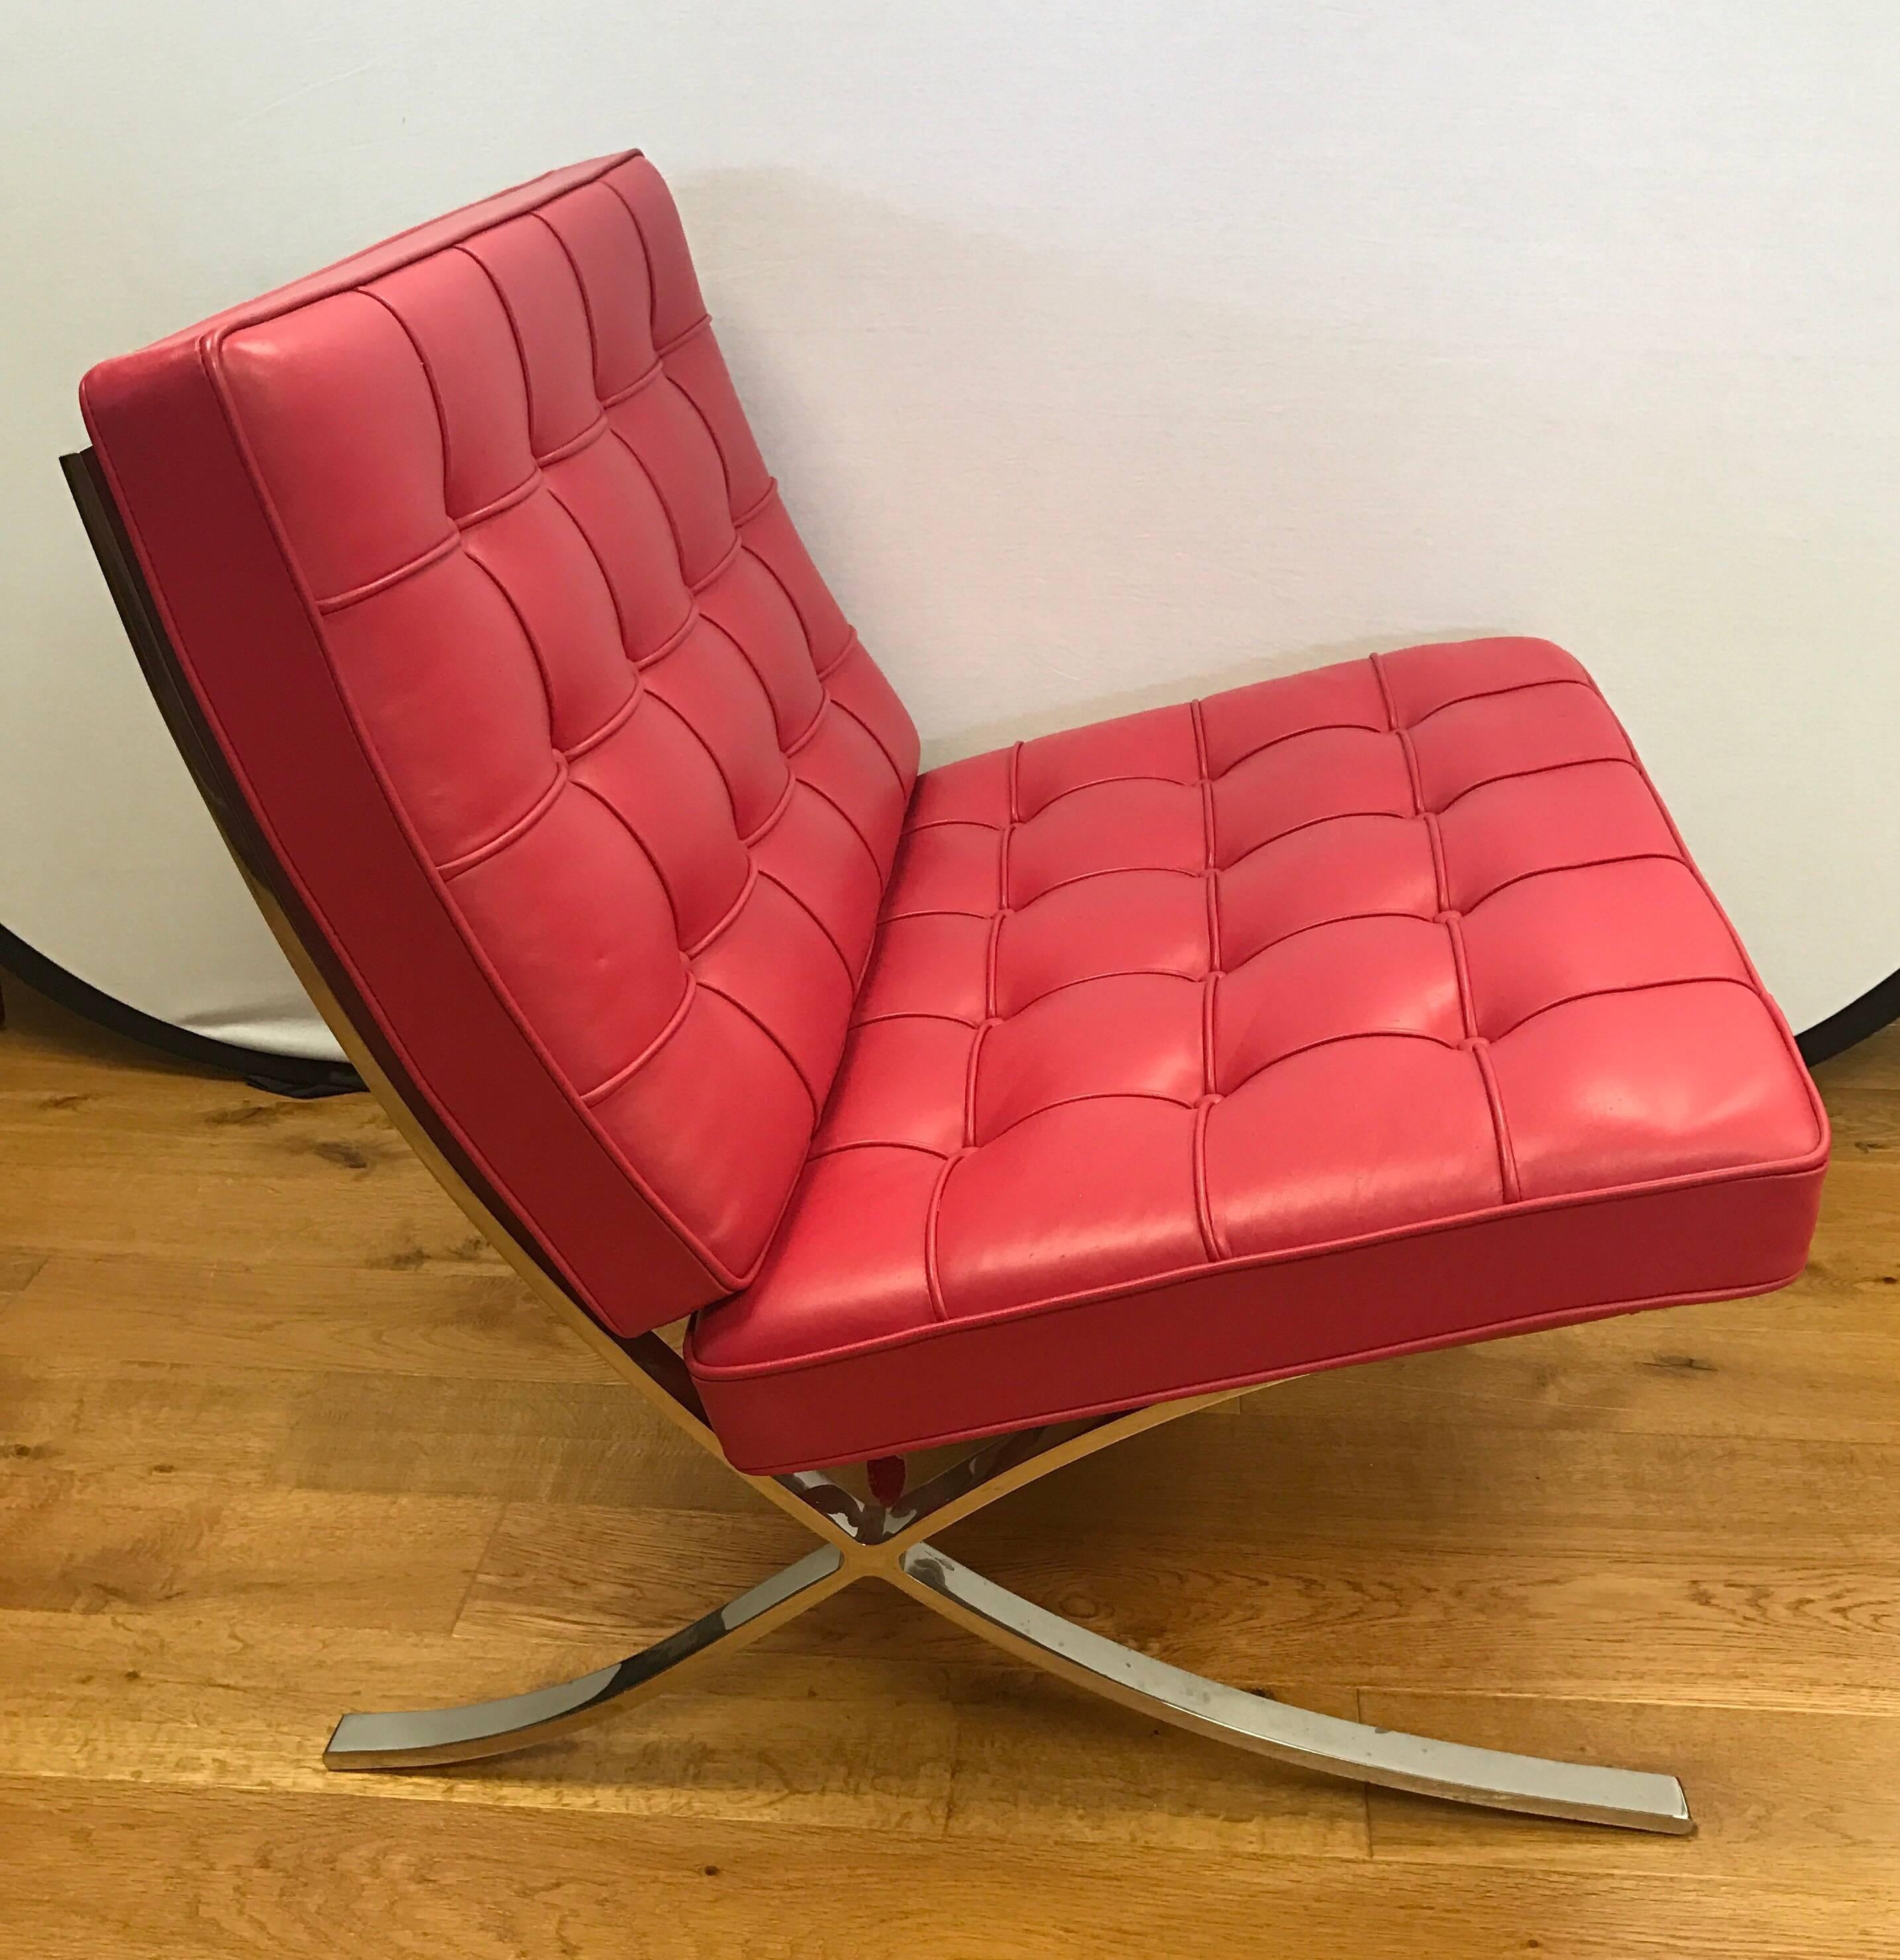 Contemporary Knoll Signed Rare Magenta Colored Leather Barcelona Chair Mies van der Rohe